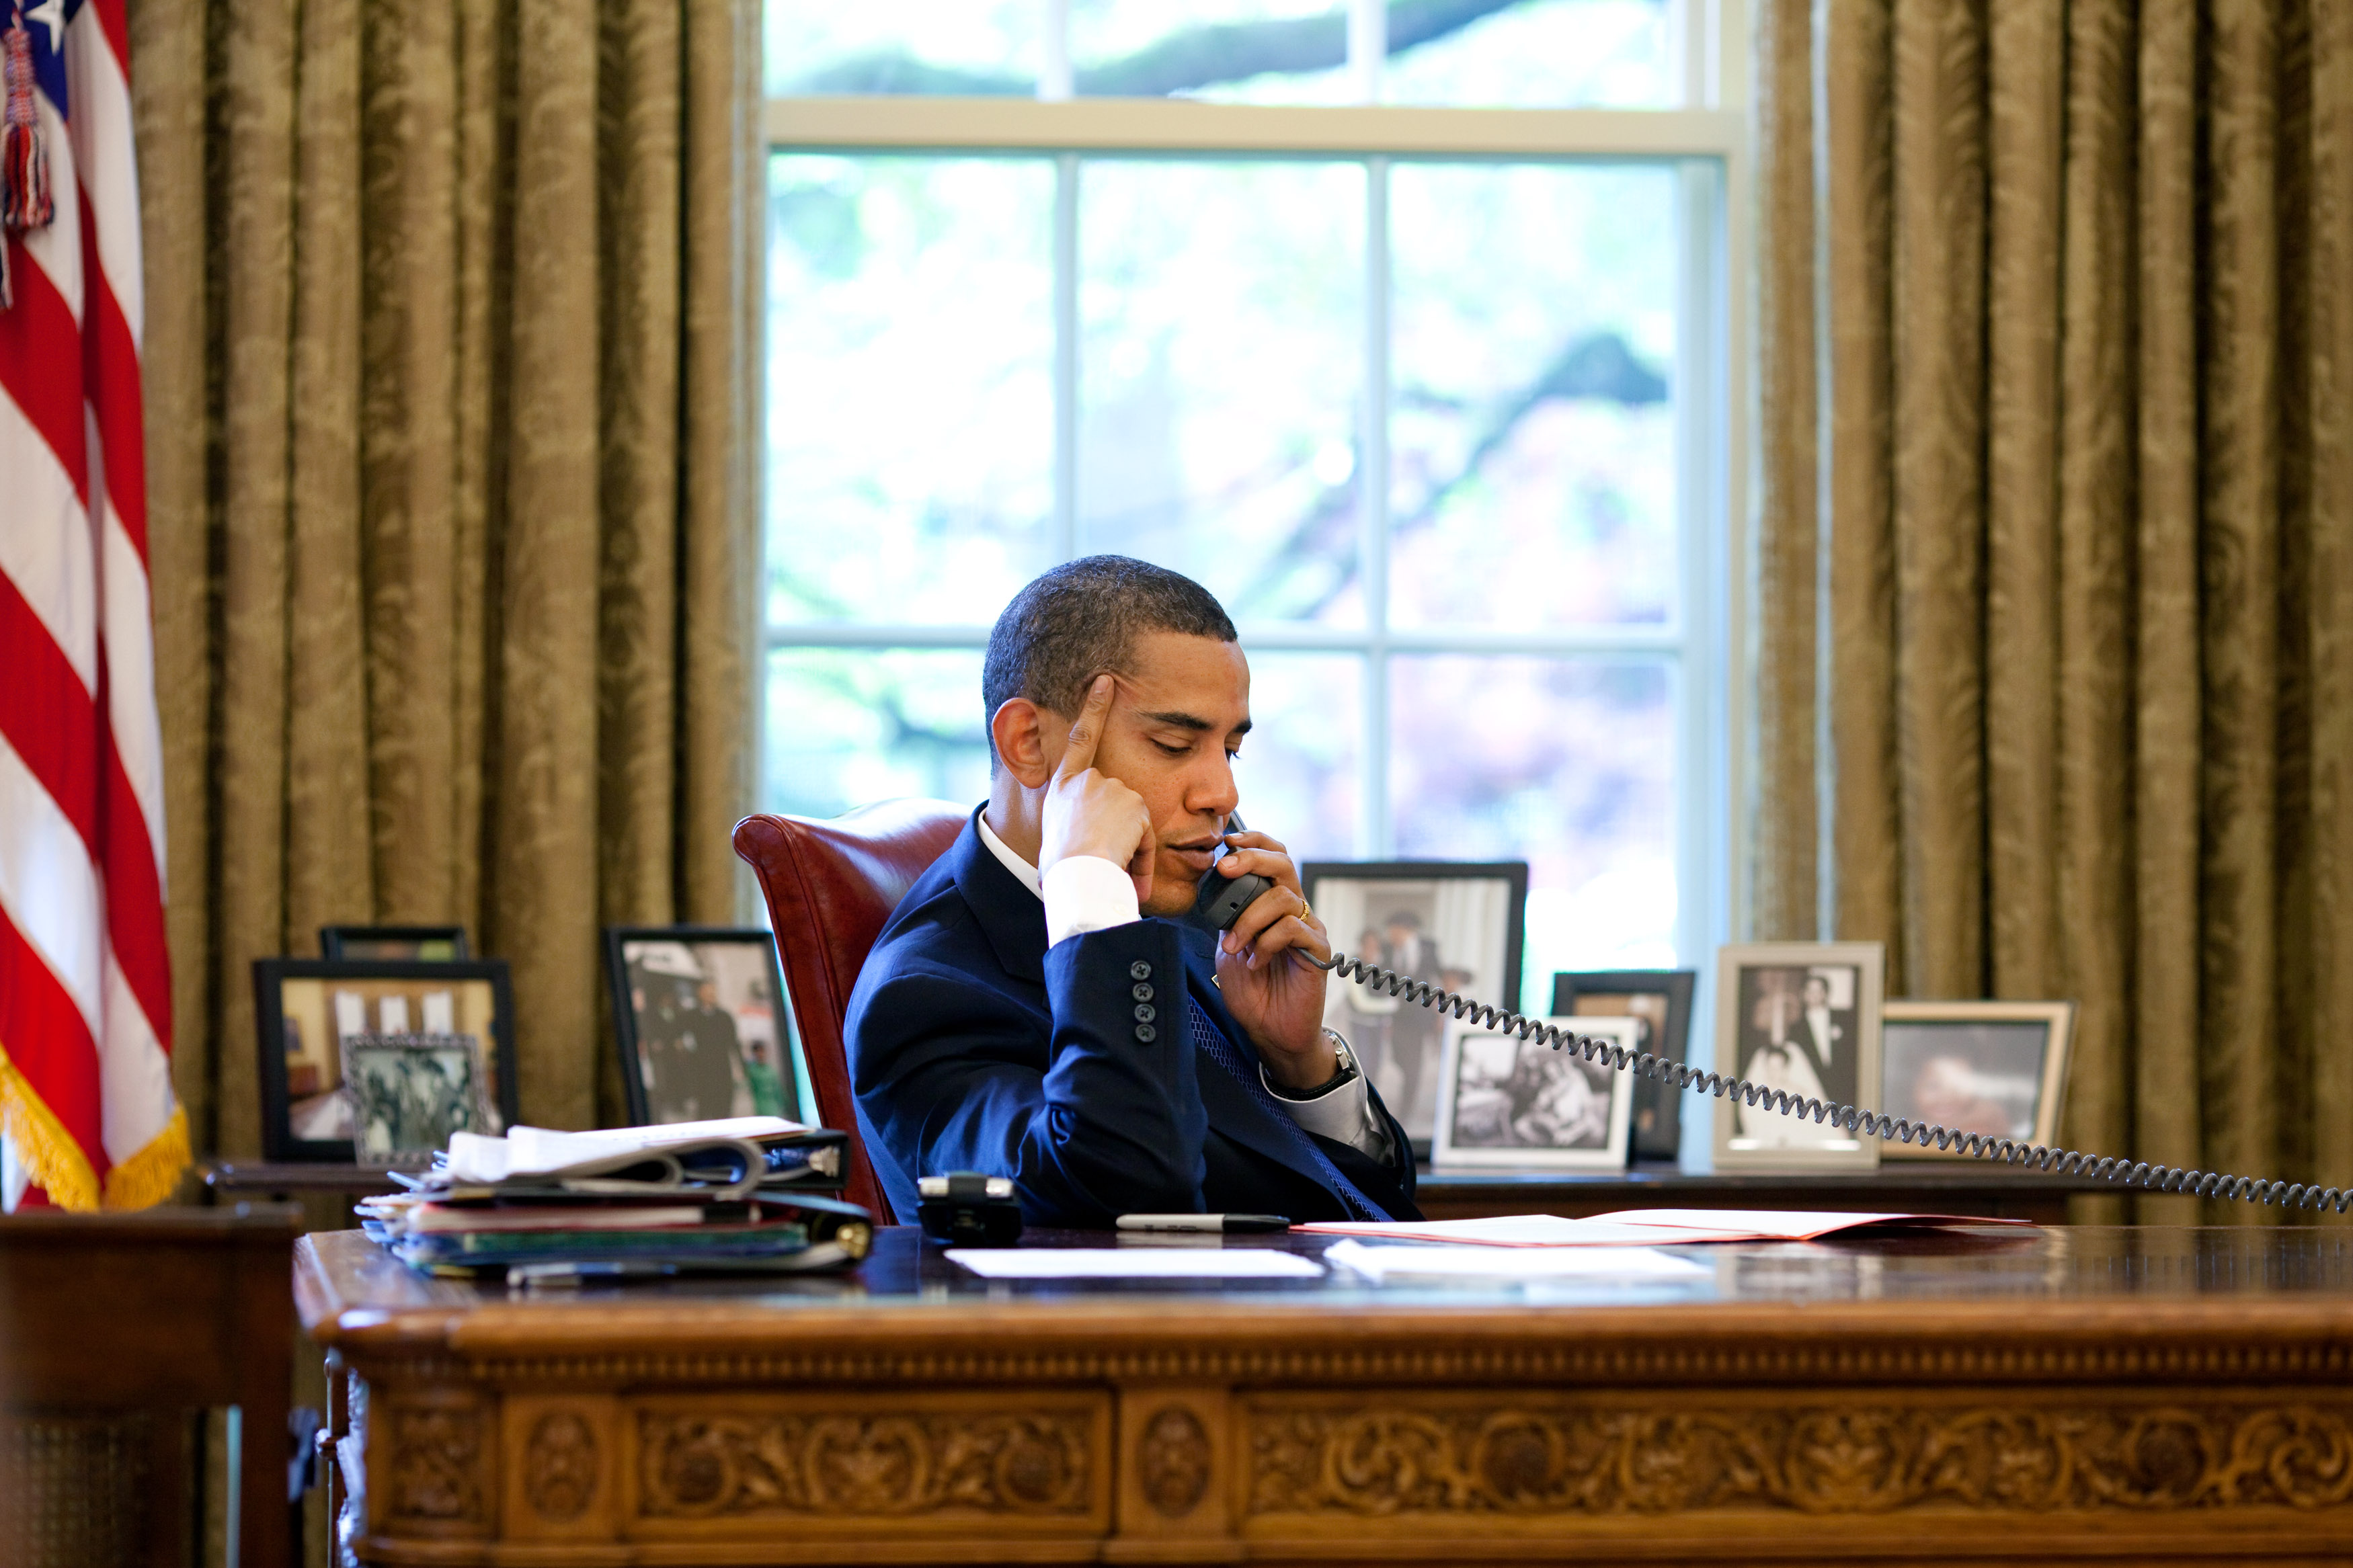 President Barack Obama sits at his desk in the  Oval Office during a phone call with Chinese President Hu Jintao May 6, 2009. Official White House Photo by Pete Souza.  This official White House photograph is being made available for publication by news organizations and/or for personal use printing by the subject(s) of the photograph. The photograph may not be manipulated in any way or used in materials, advertisements, products, or promotions that in any way suggest approval or endorsement of the President, the First Family, or the White House.